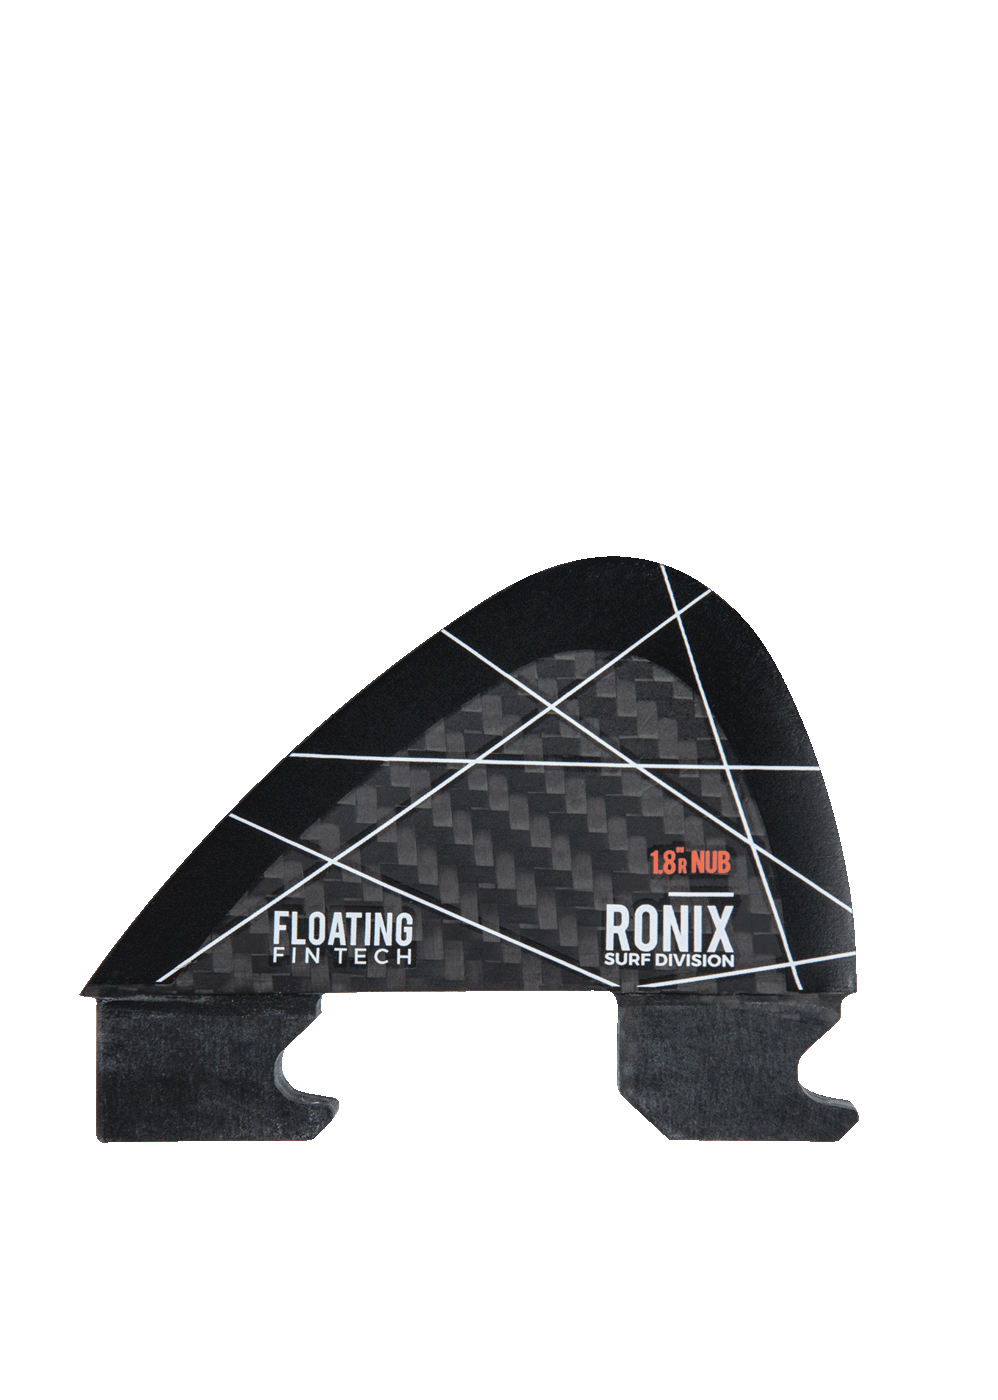 Ronix Fin-S 1.8" Nubby Floating Wakesurf Fin | Sale! (Graphic Change)